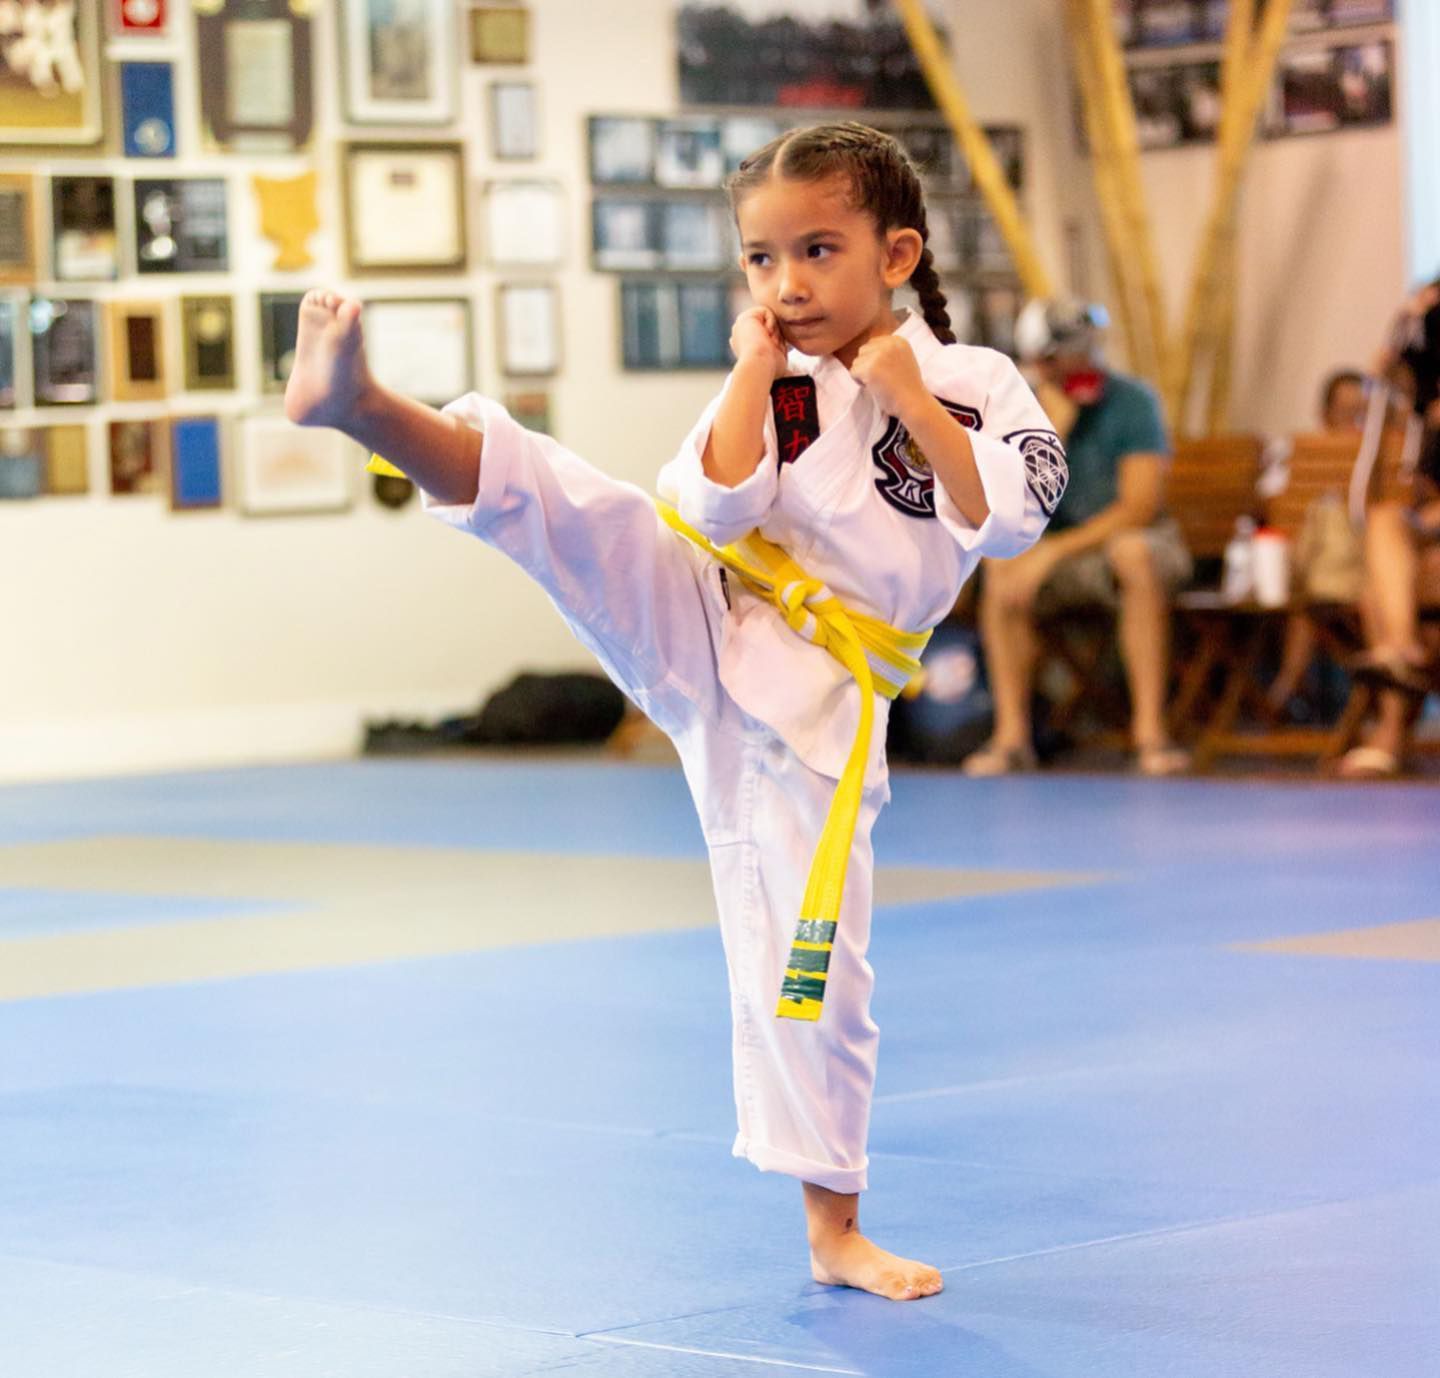 a young girl wearing a white karate uniform with a yellow belt